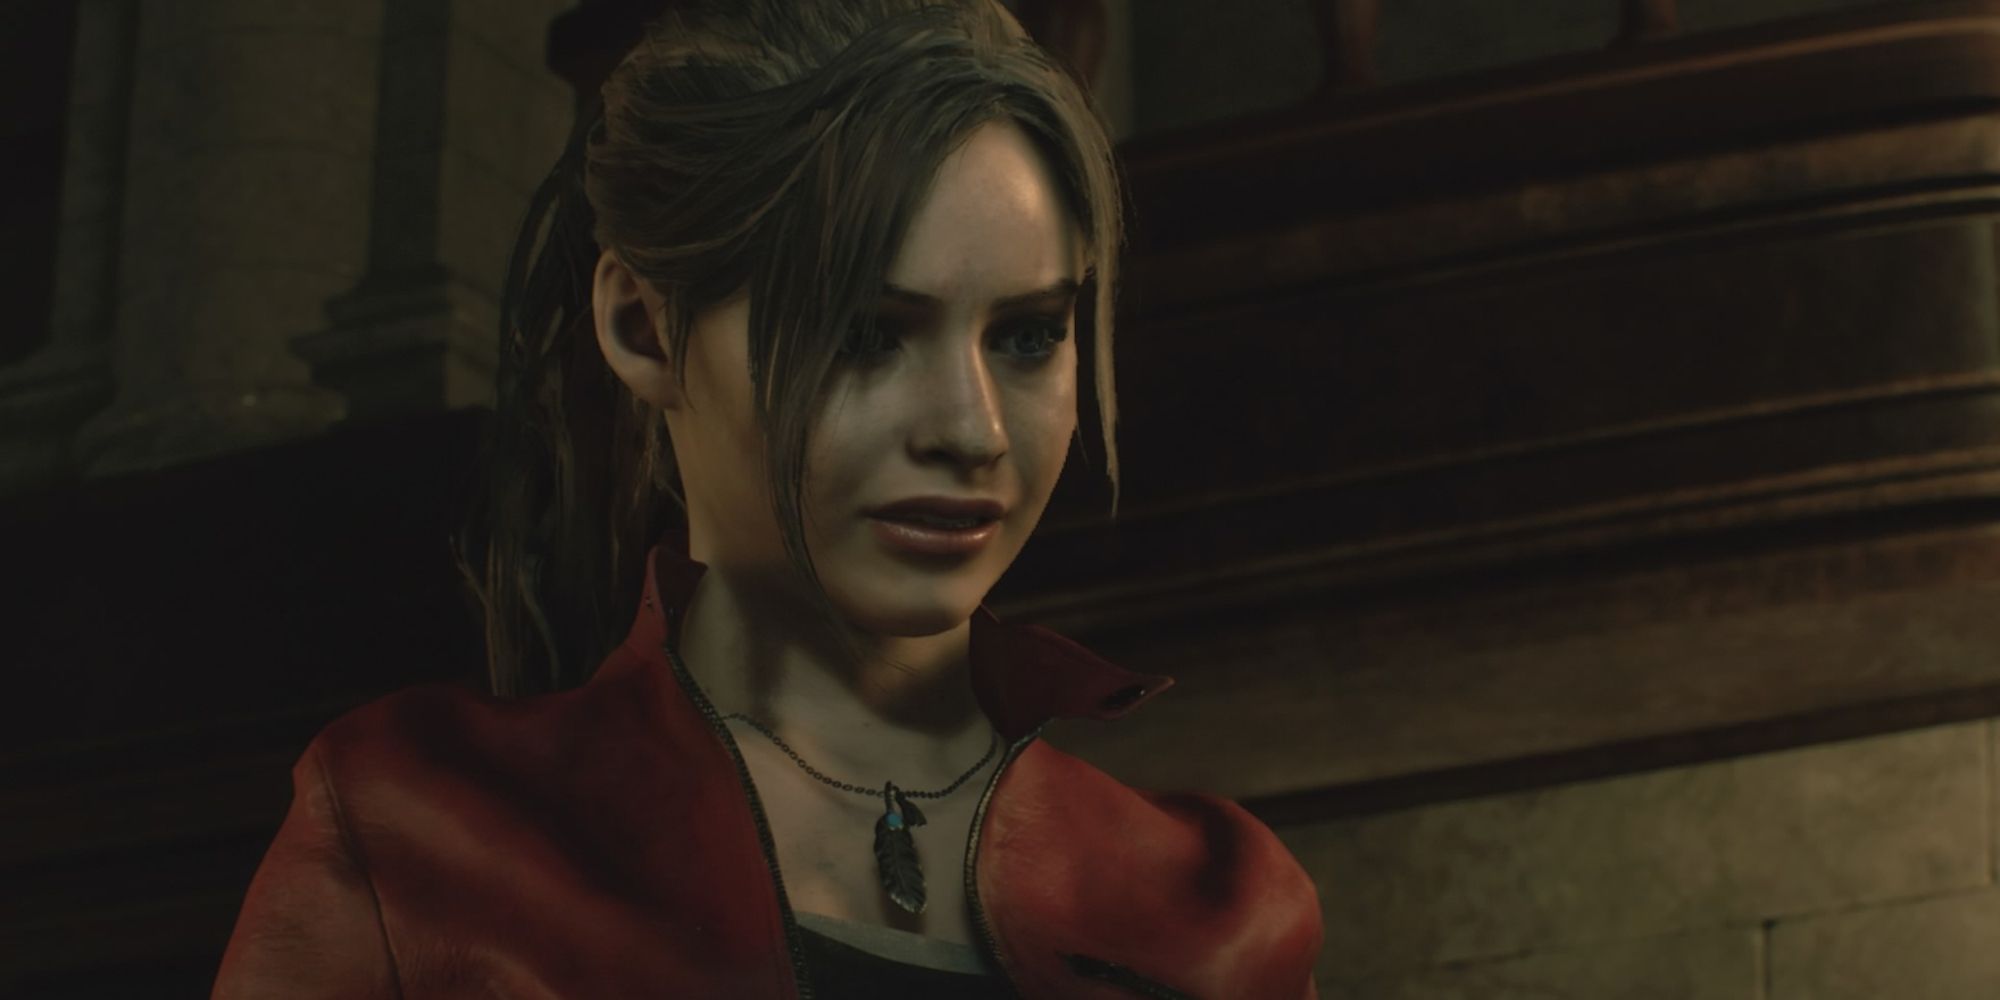 Claire in the Resident Evil 2 remake